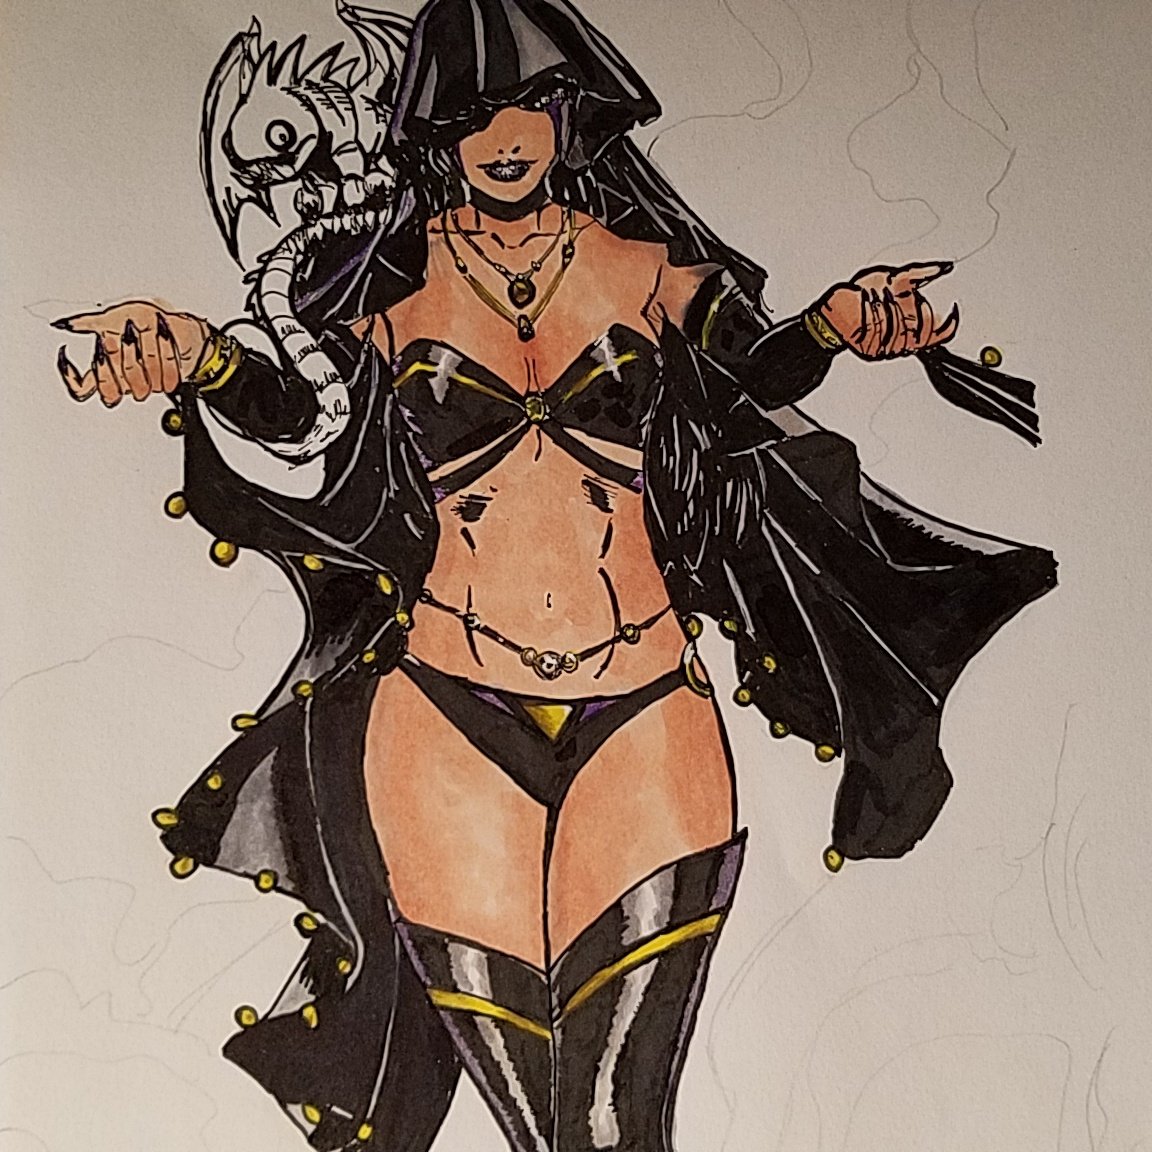 #shiklah (originally done by @Reilly_Brown in #Deadpool Gauntlet#3) #copic #inking #copicpractice